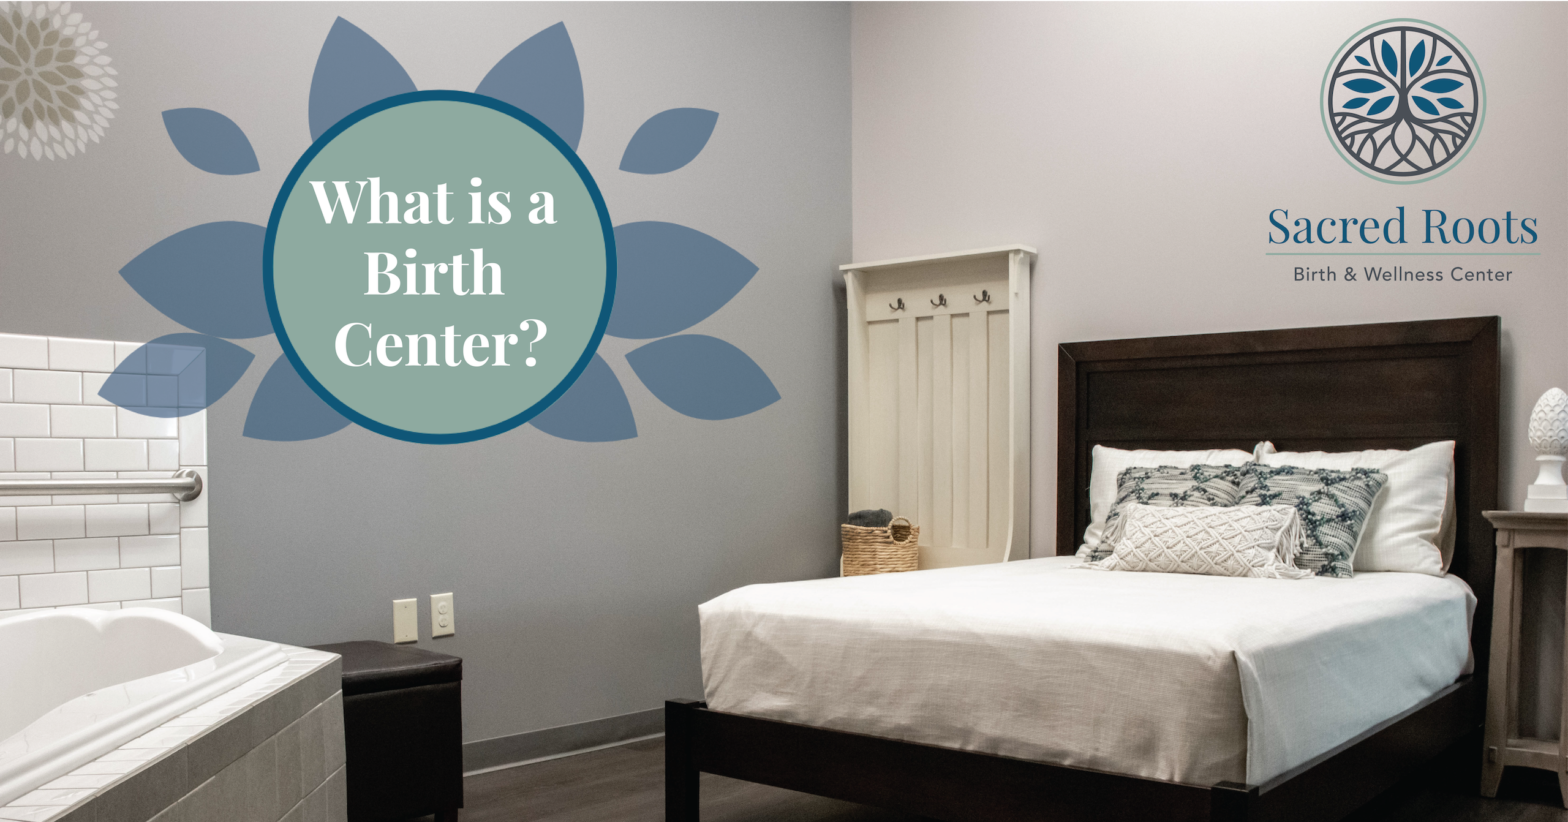 What is a Birth Center?